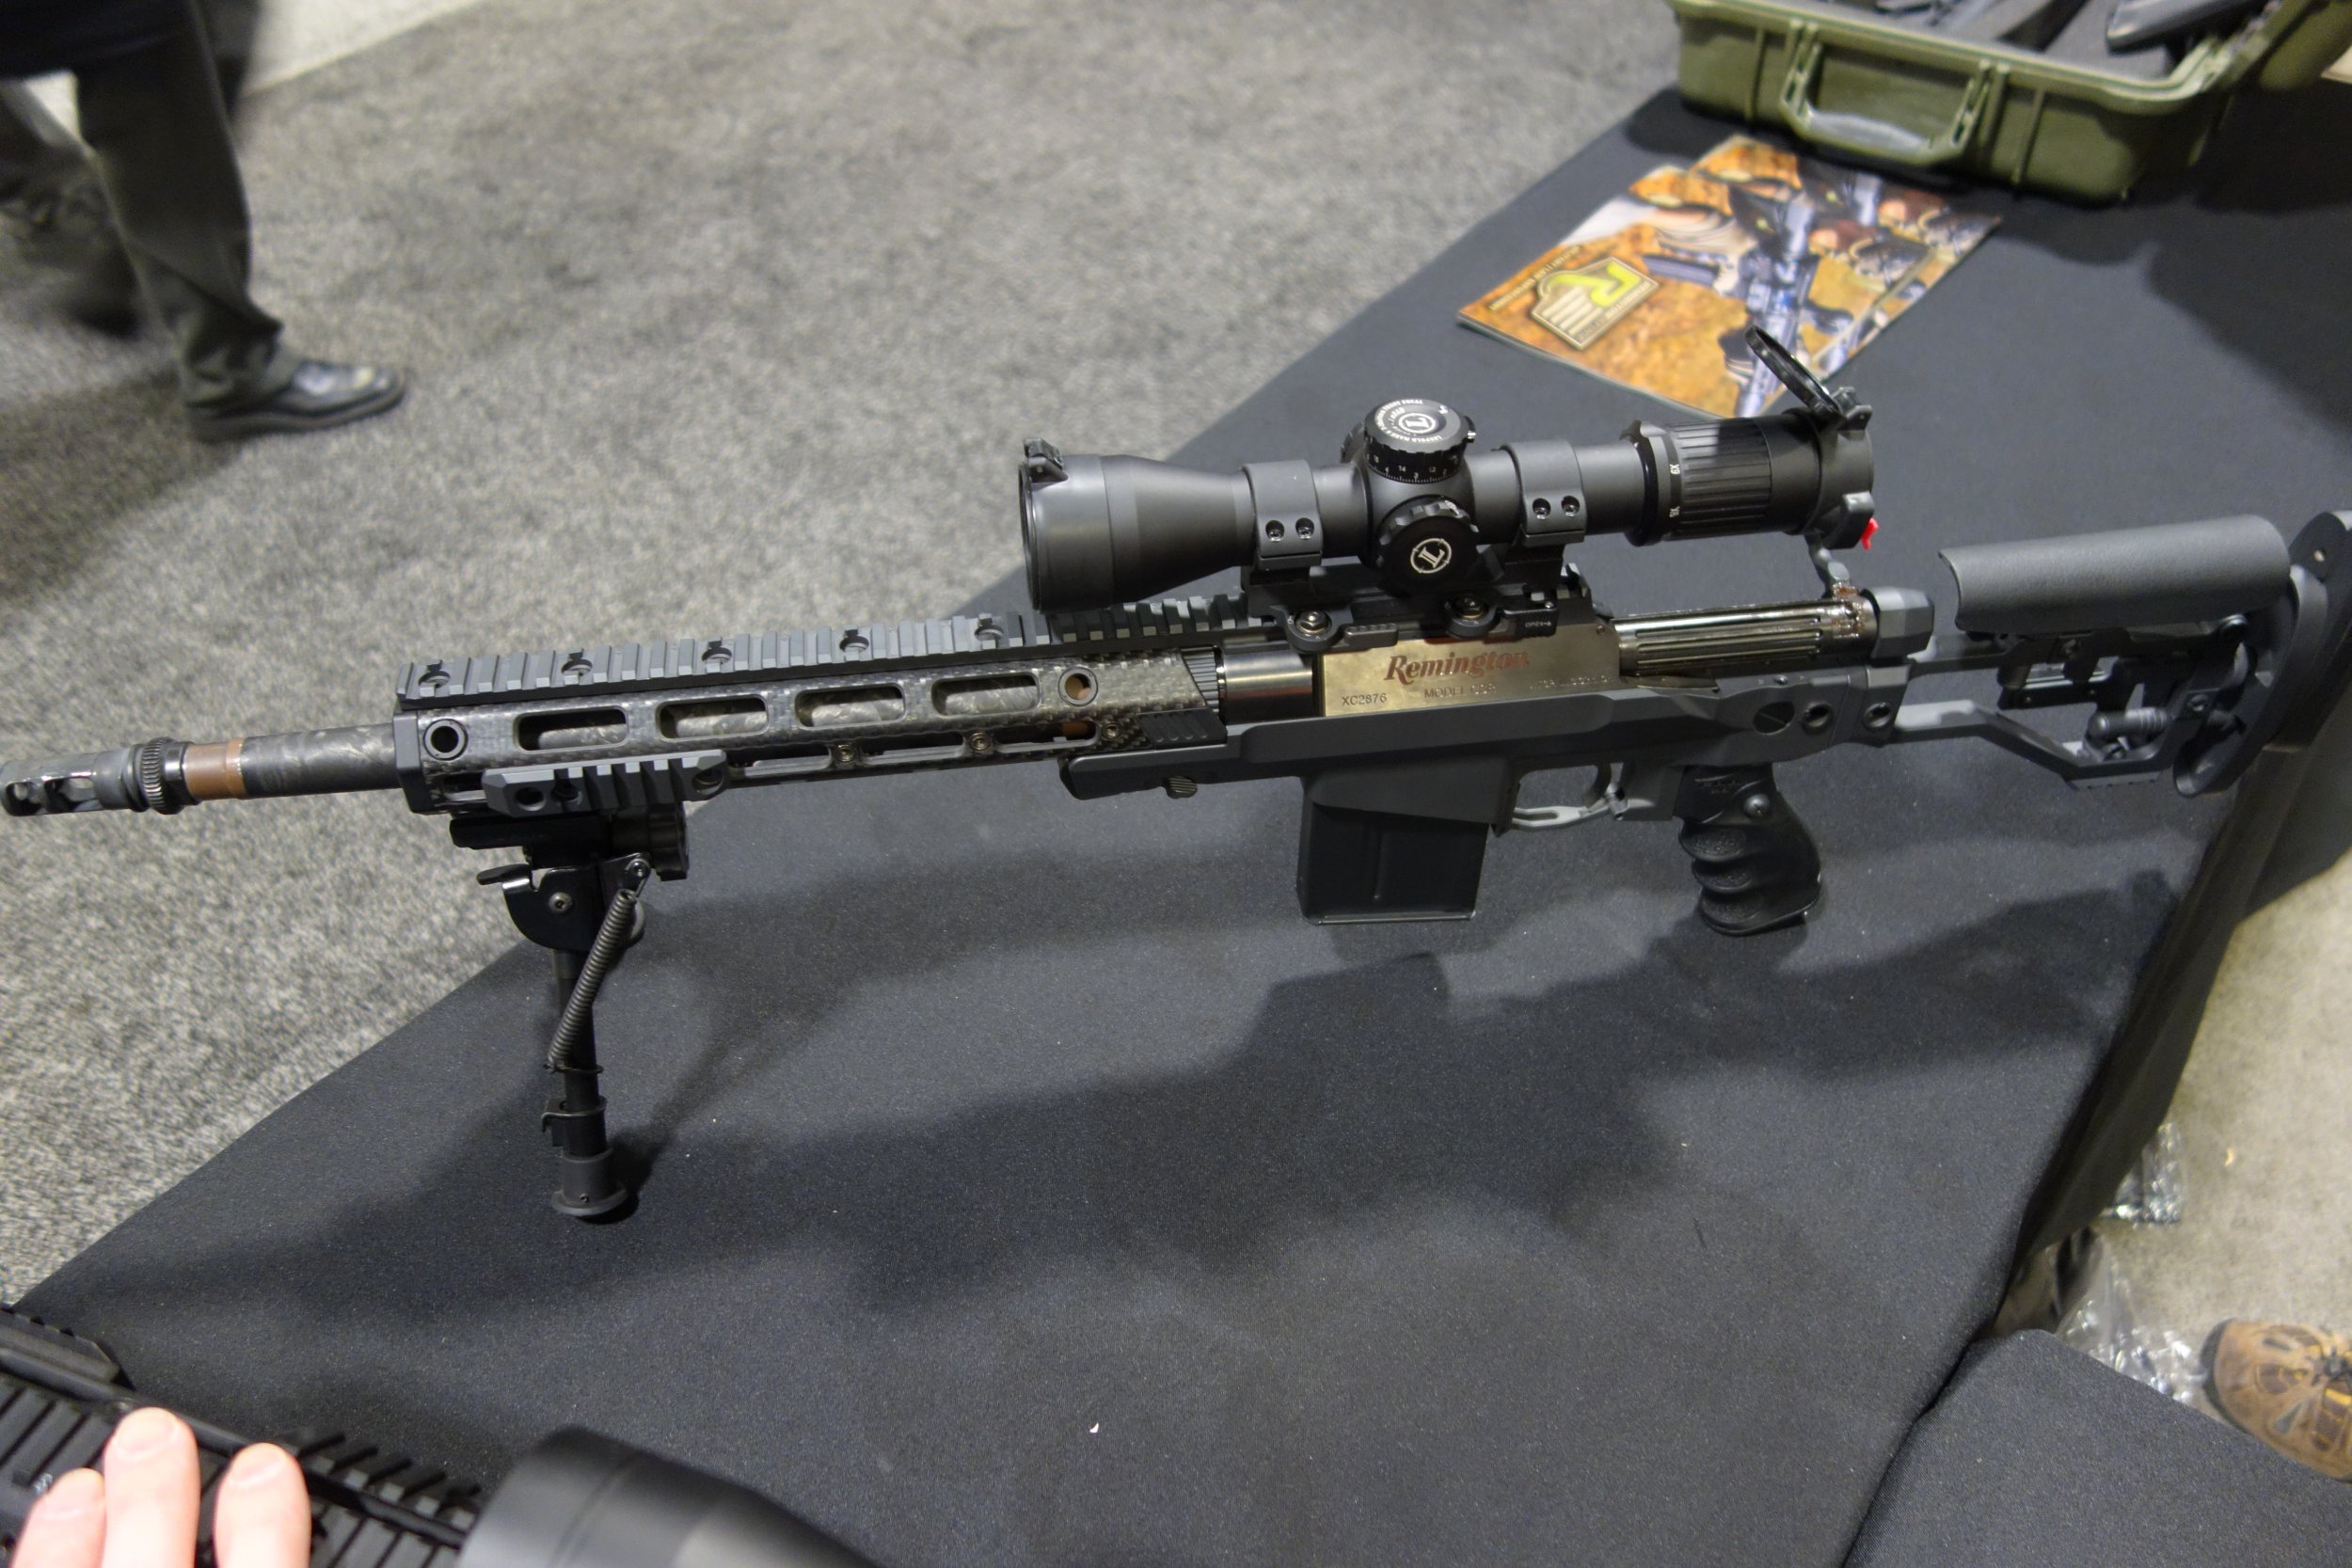 Remington_Defense_CSR_Concealable_Sniper_Rifle_Rucksack_Rifle_Breakdown_Takedown_Suppressed_Sniper_Carbine_with_Proof_Research_16-inch_Carbone_Fiber-Wrapped_Barrel_NDIA_SOFIC_2014_David_Crane_DefenseReview.com_DR_2.jpg